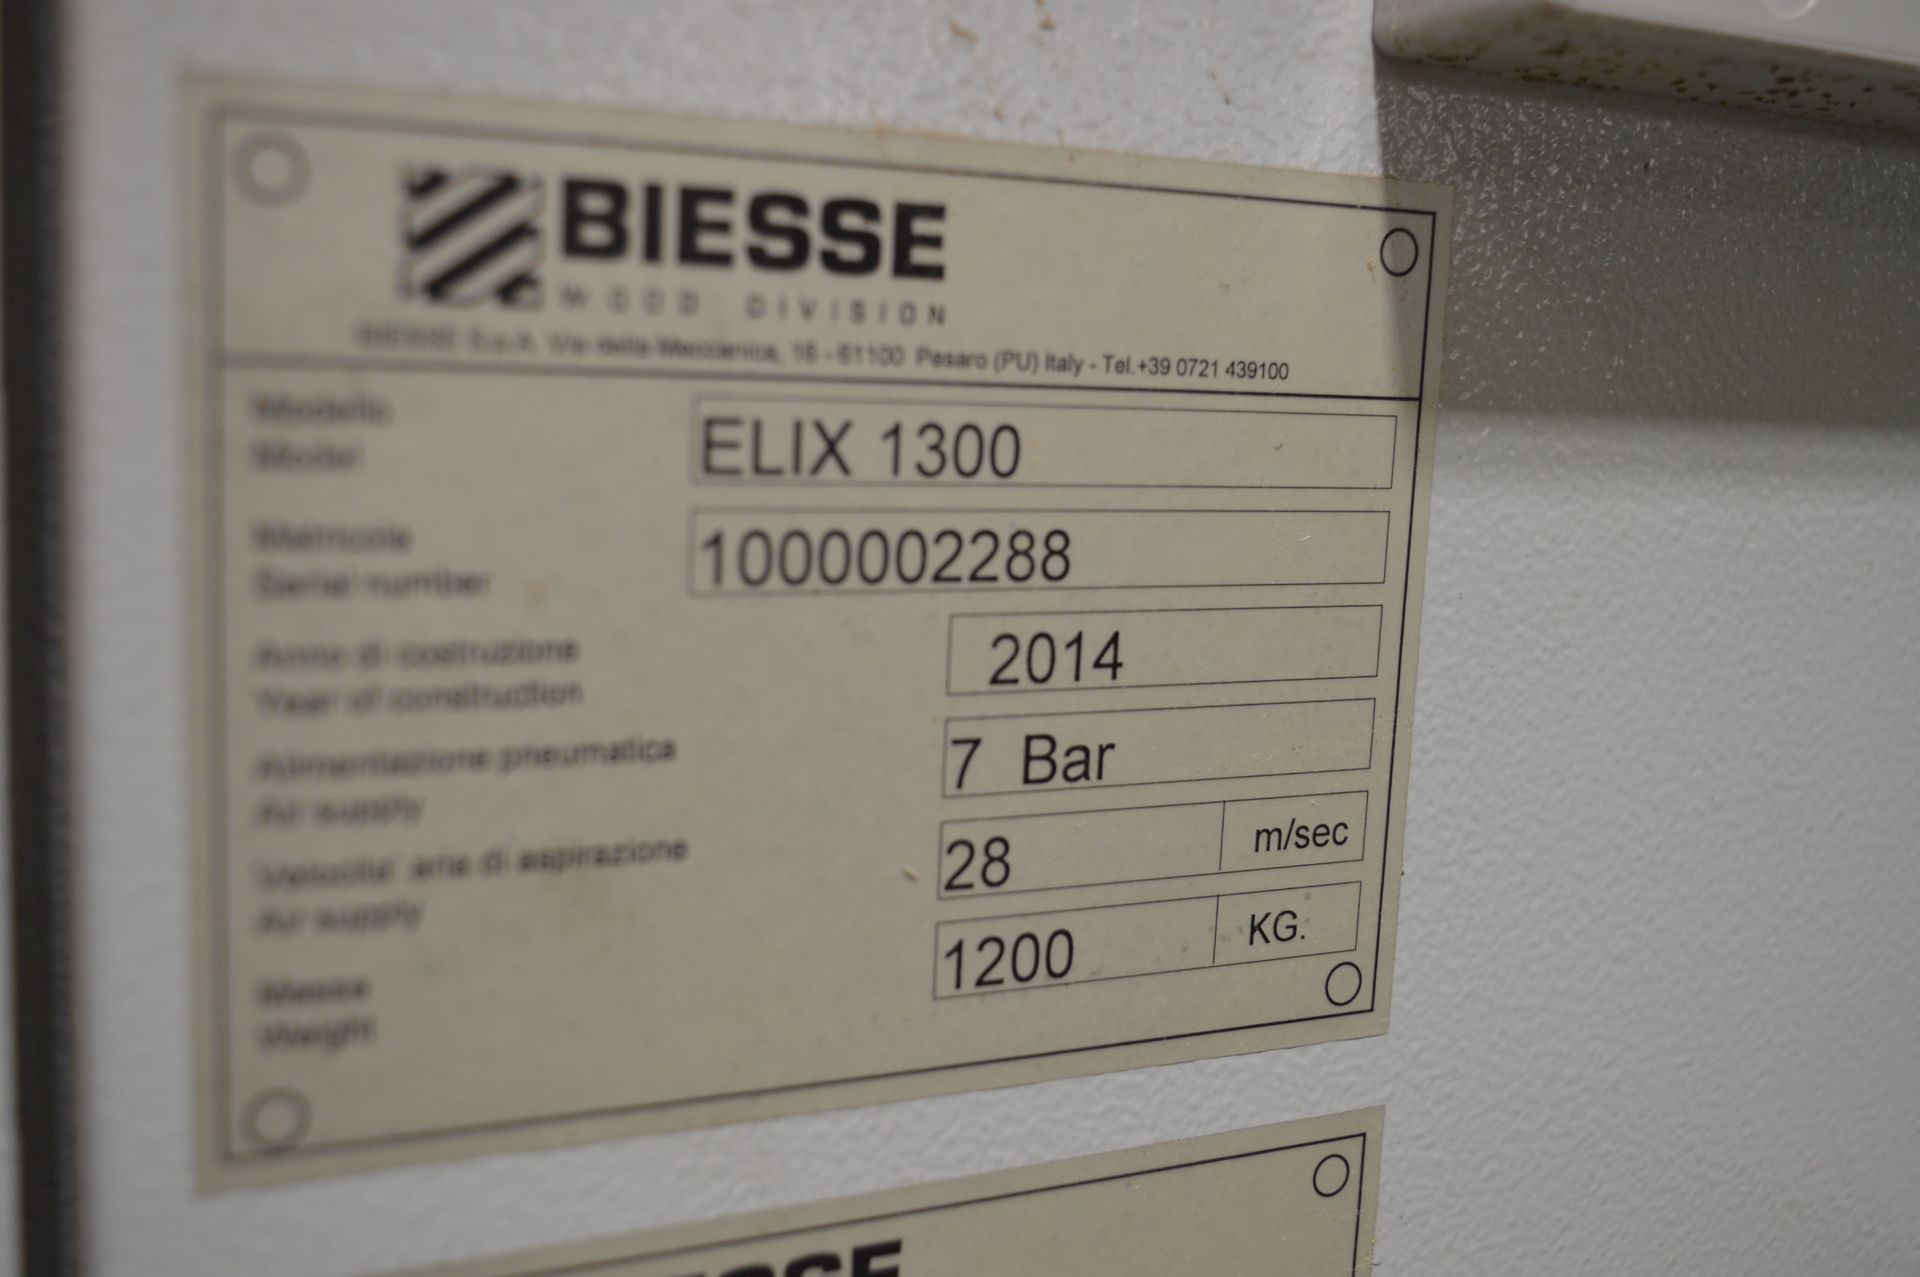 Biesse, Elix 1300 K4 CNC point to point dowel drilling and insertion machine, Serial No. - Image 9 of 12